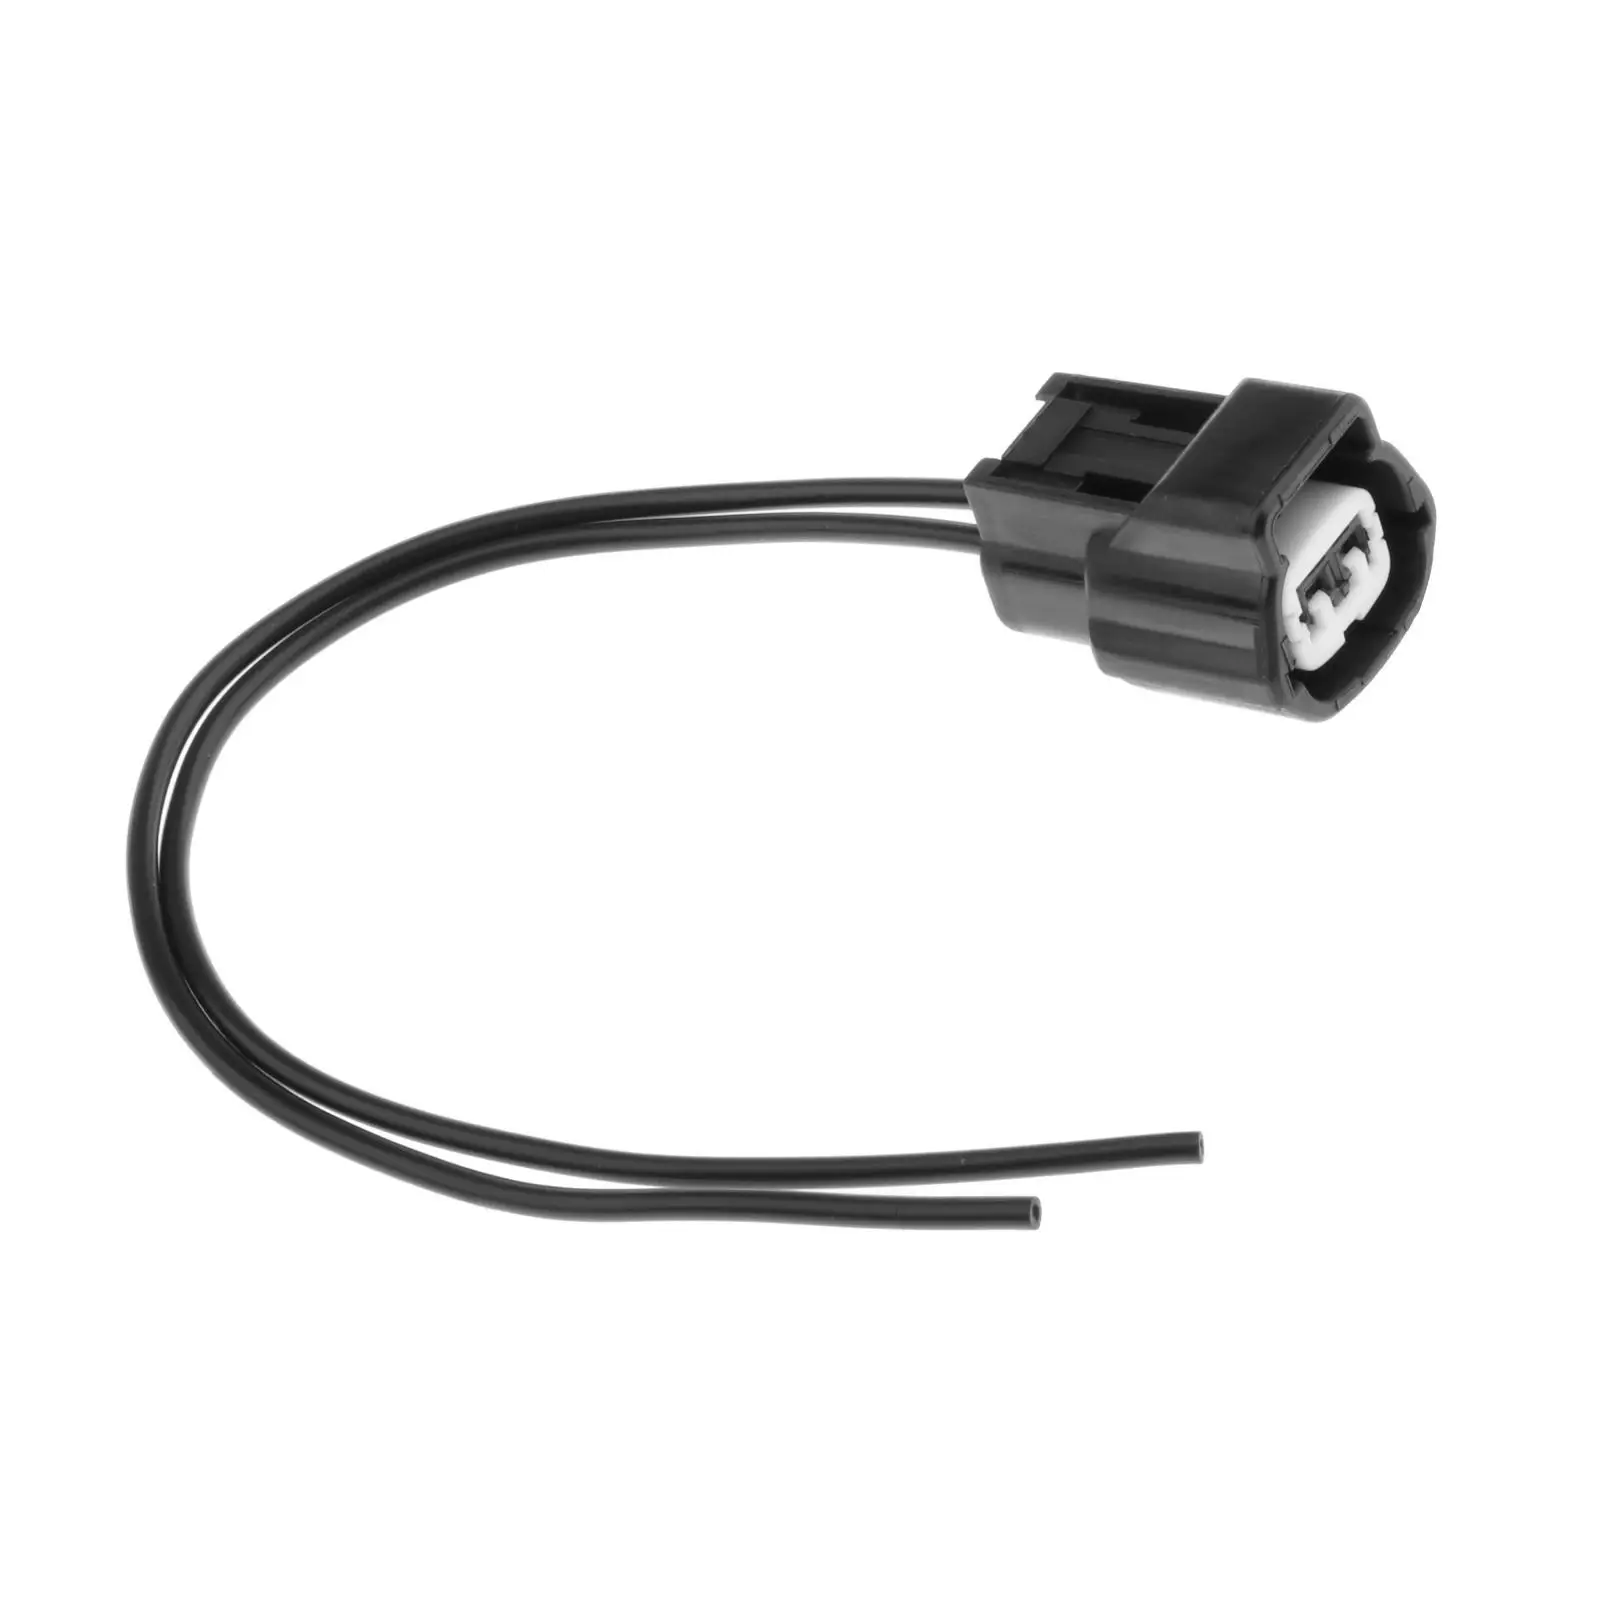 NEW  Position Sensor Connector Plug for   Frontier  , Easy installation, Direct replacement for a proper fit